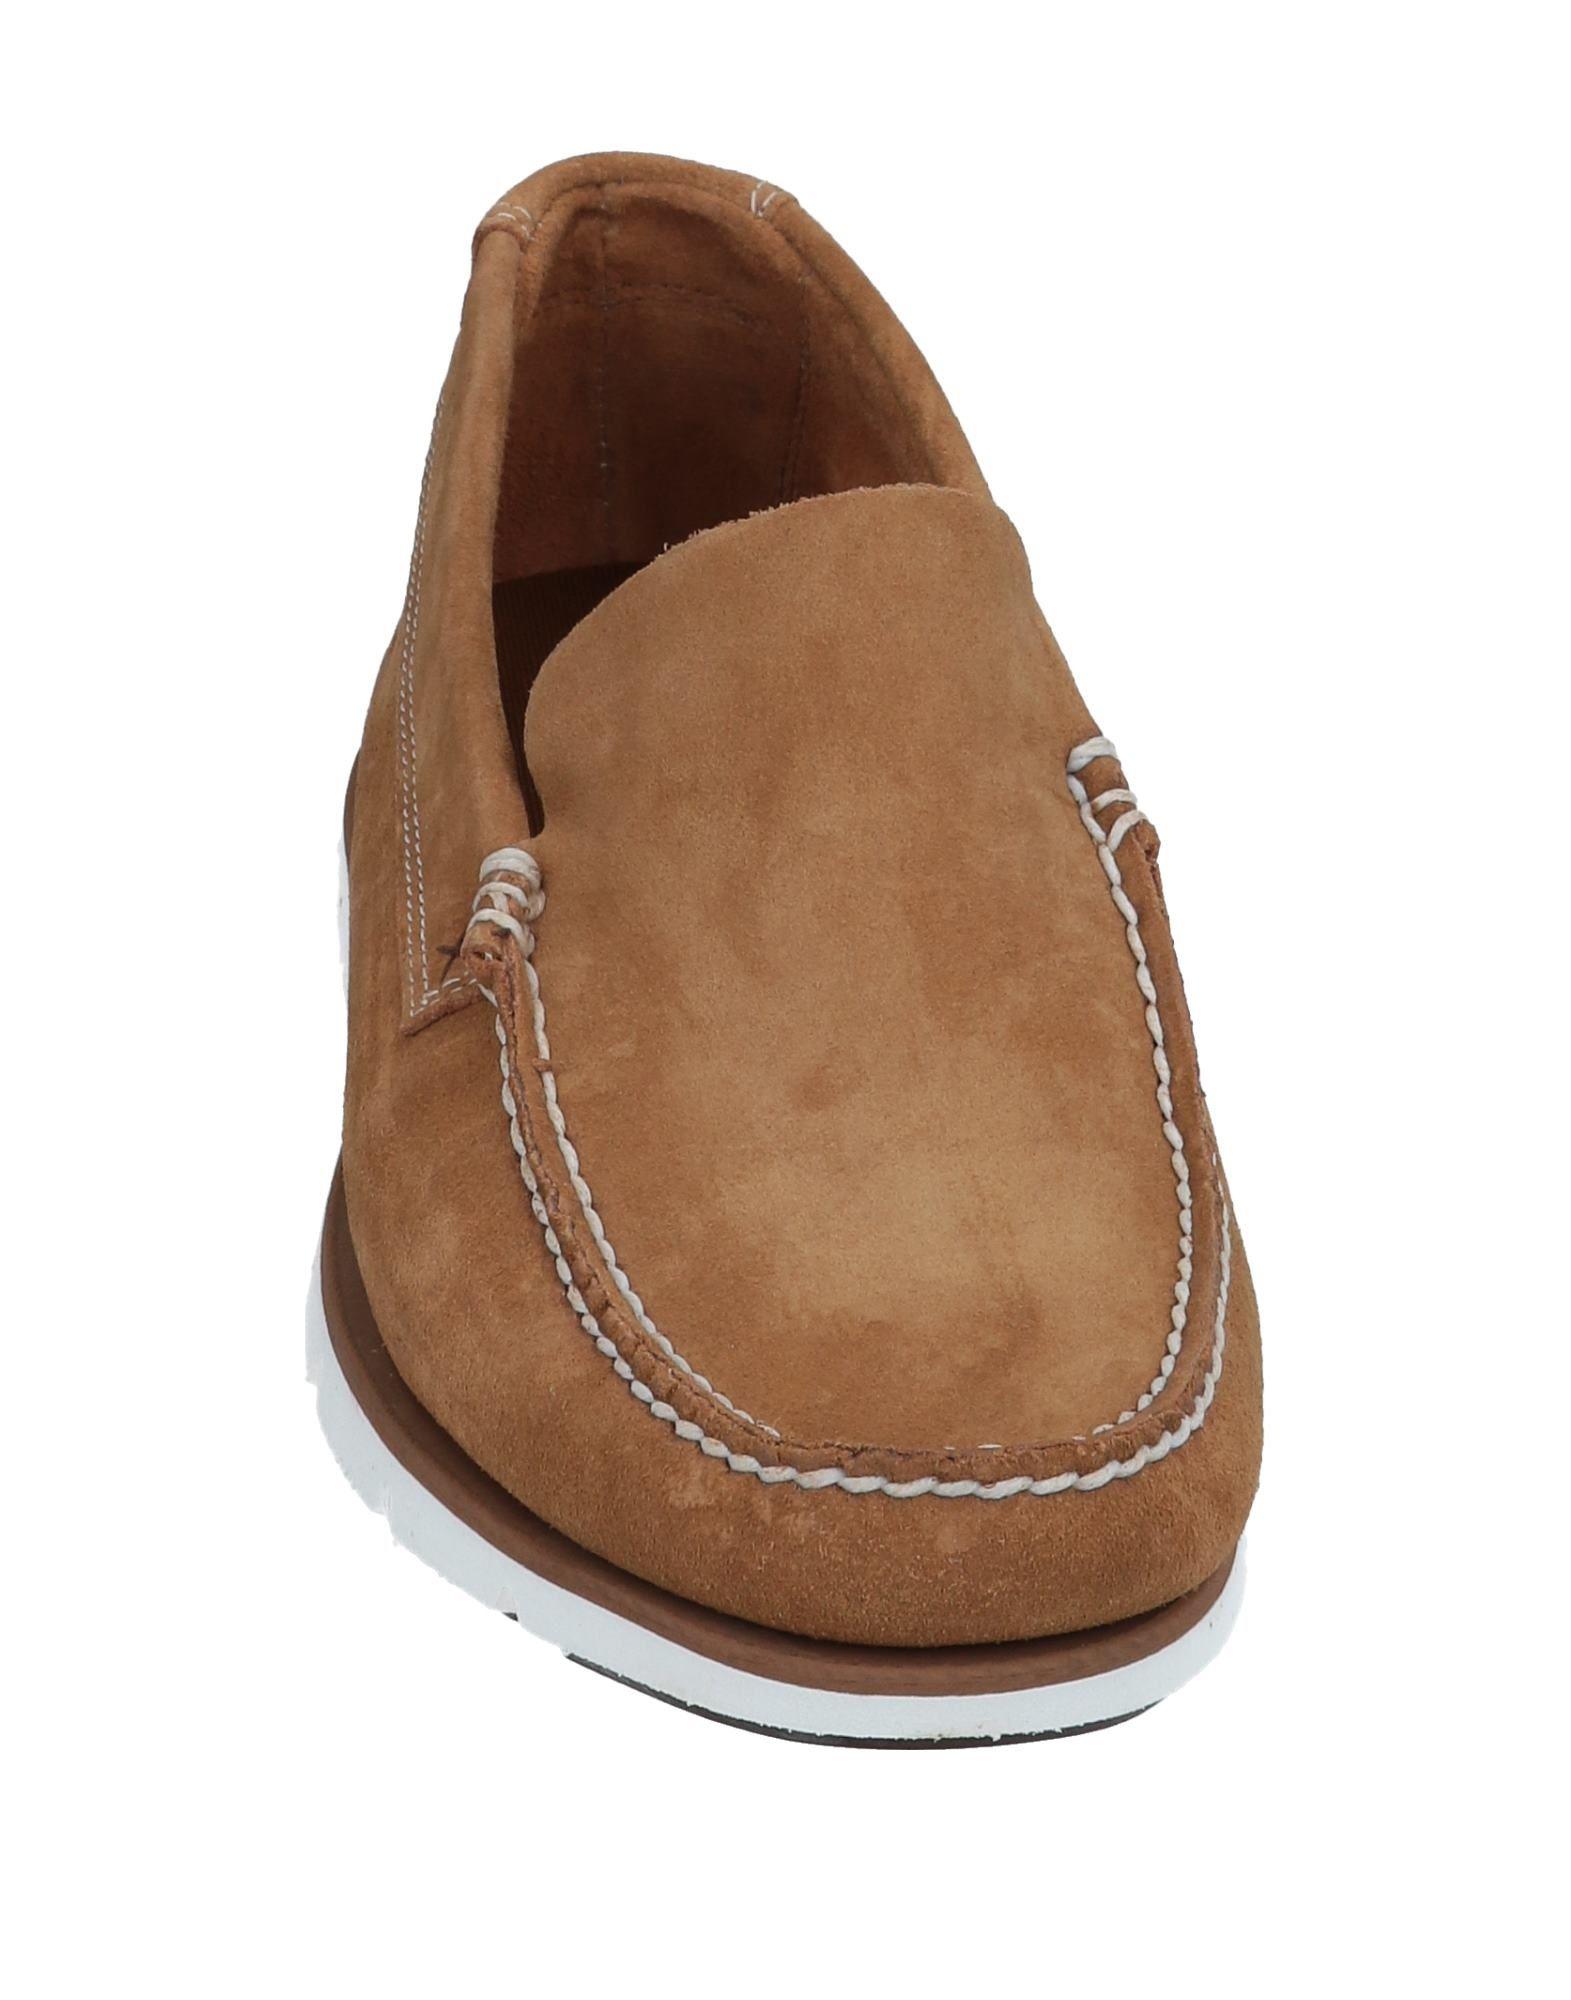 Timberland Suede Loafer in Camel (Brown) for Men - Lyst